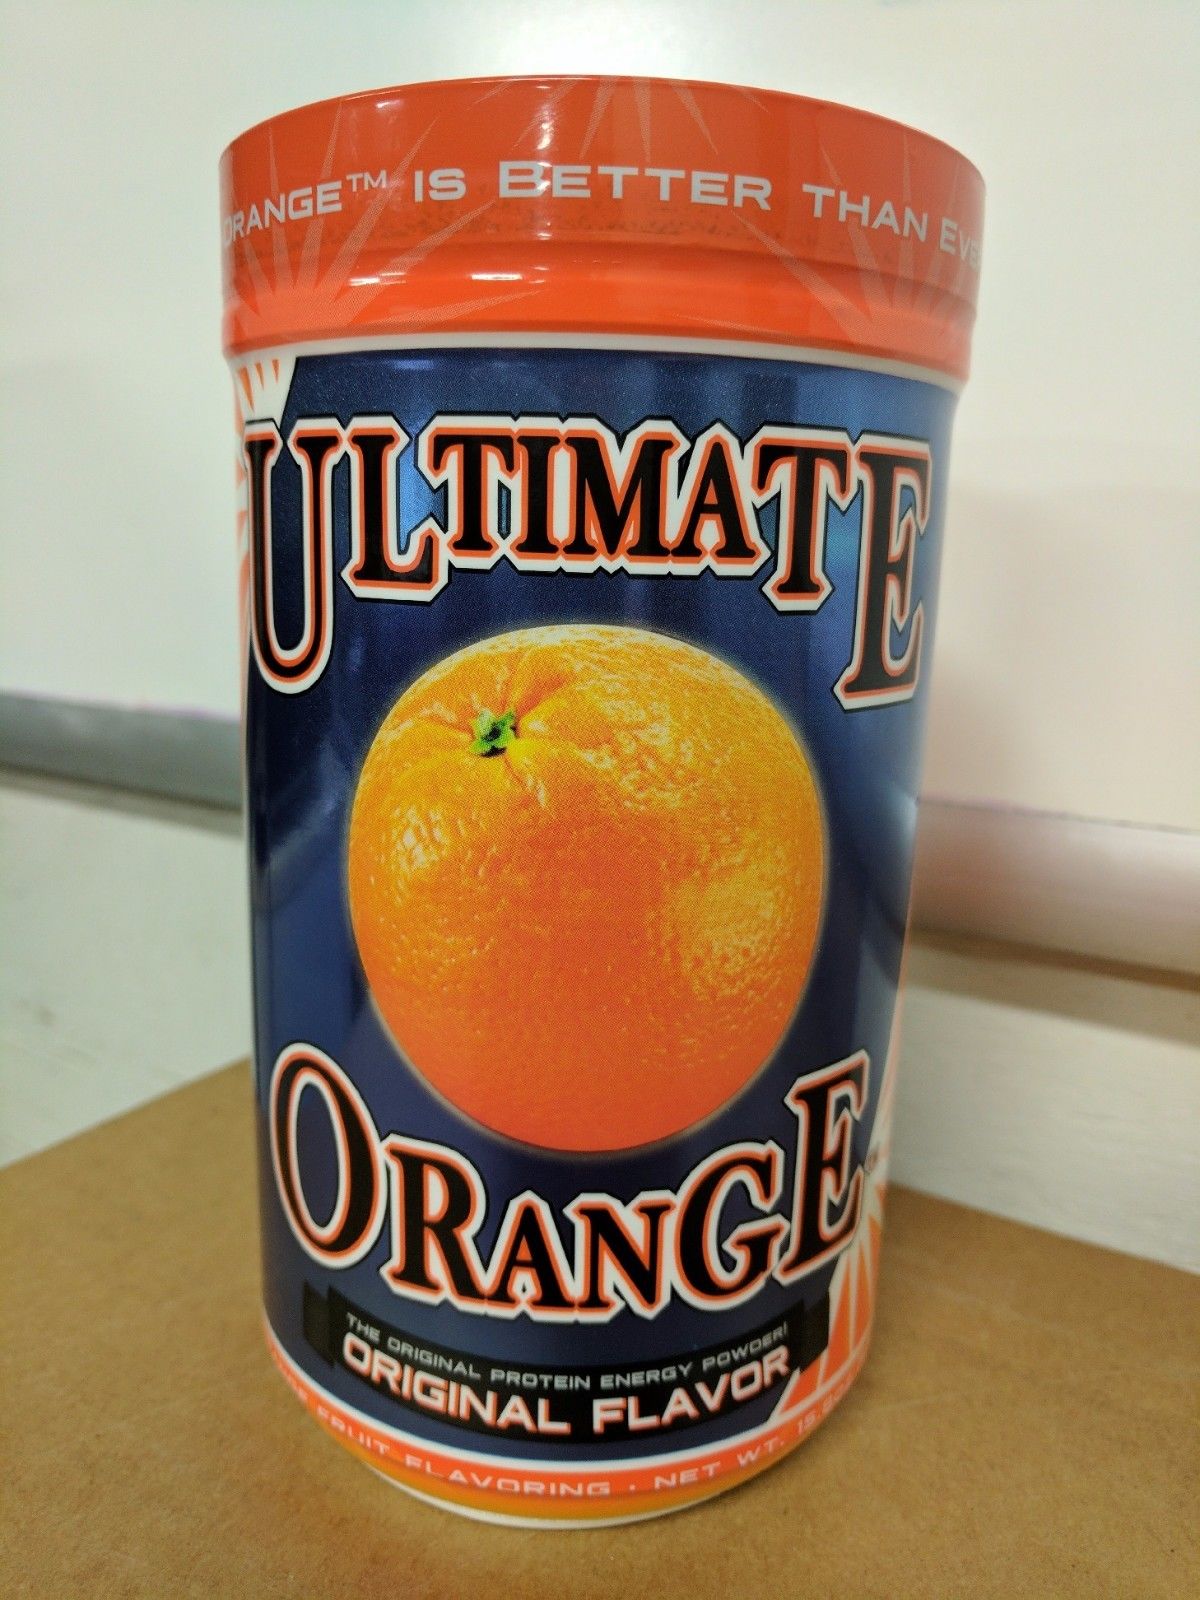 30 Minute Ultimate orange pre workout with Comfort Workout Clothes